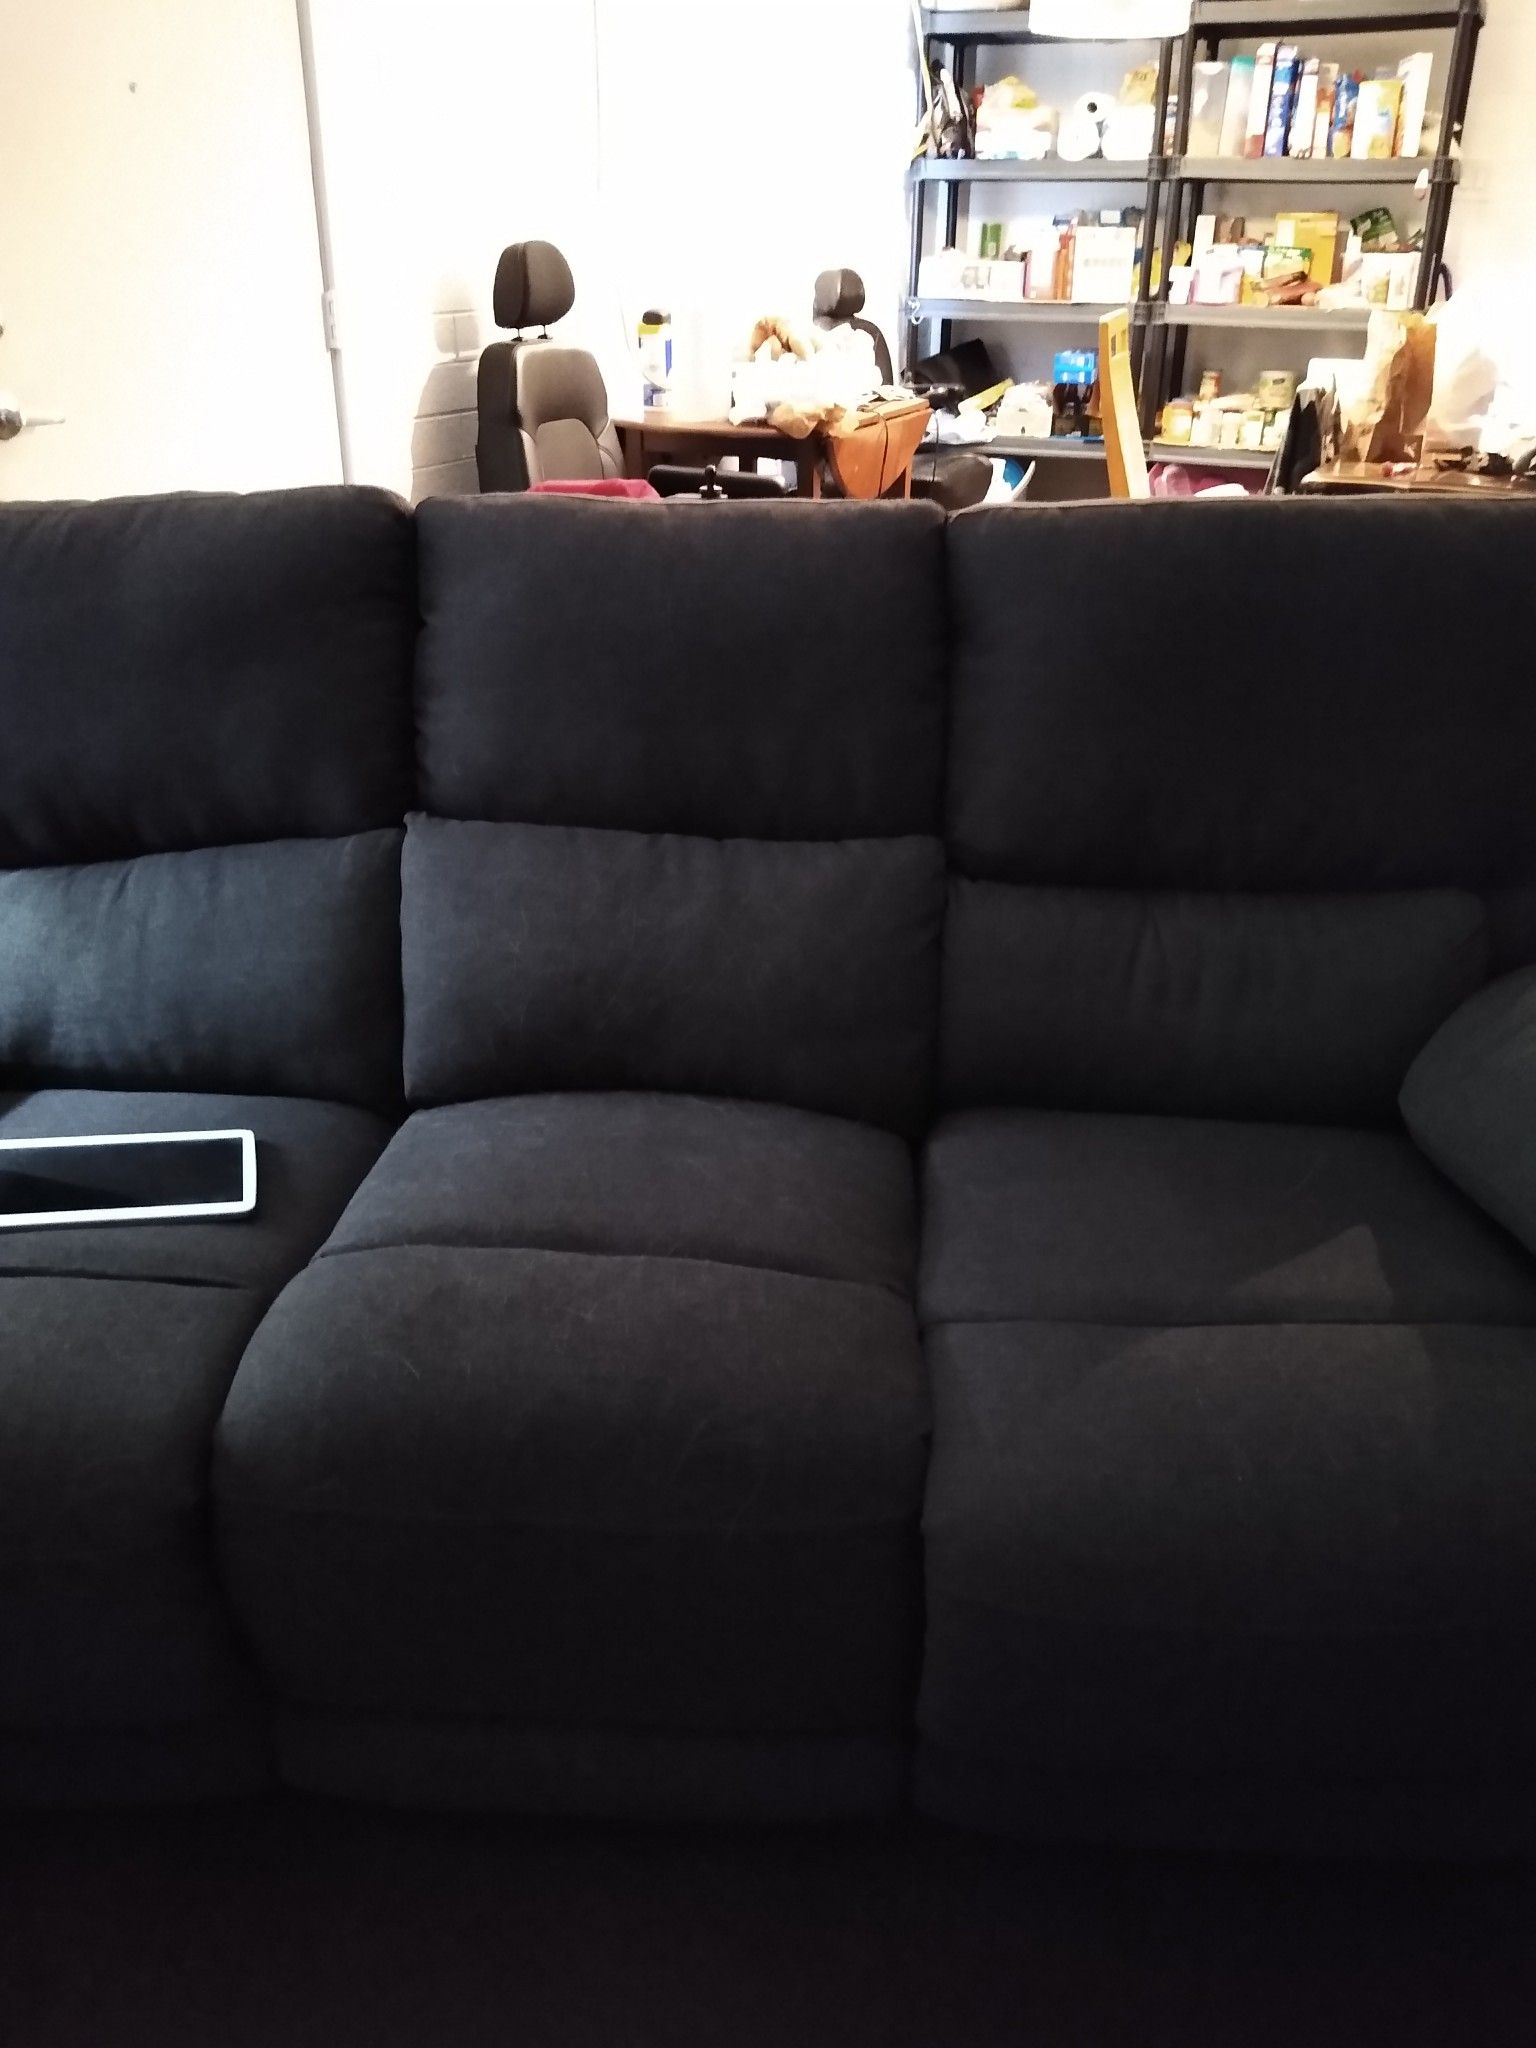 Sofa loveseat reclines on both ends